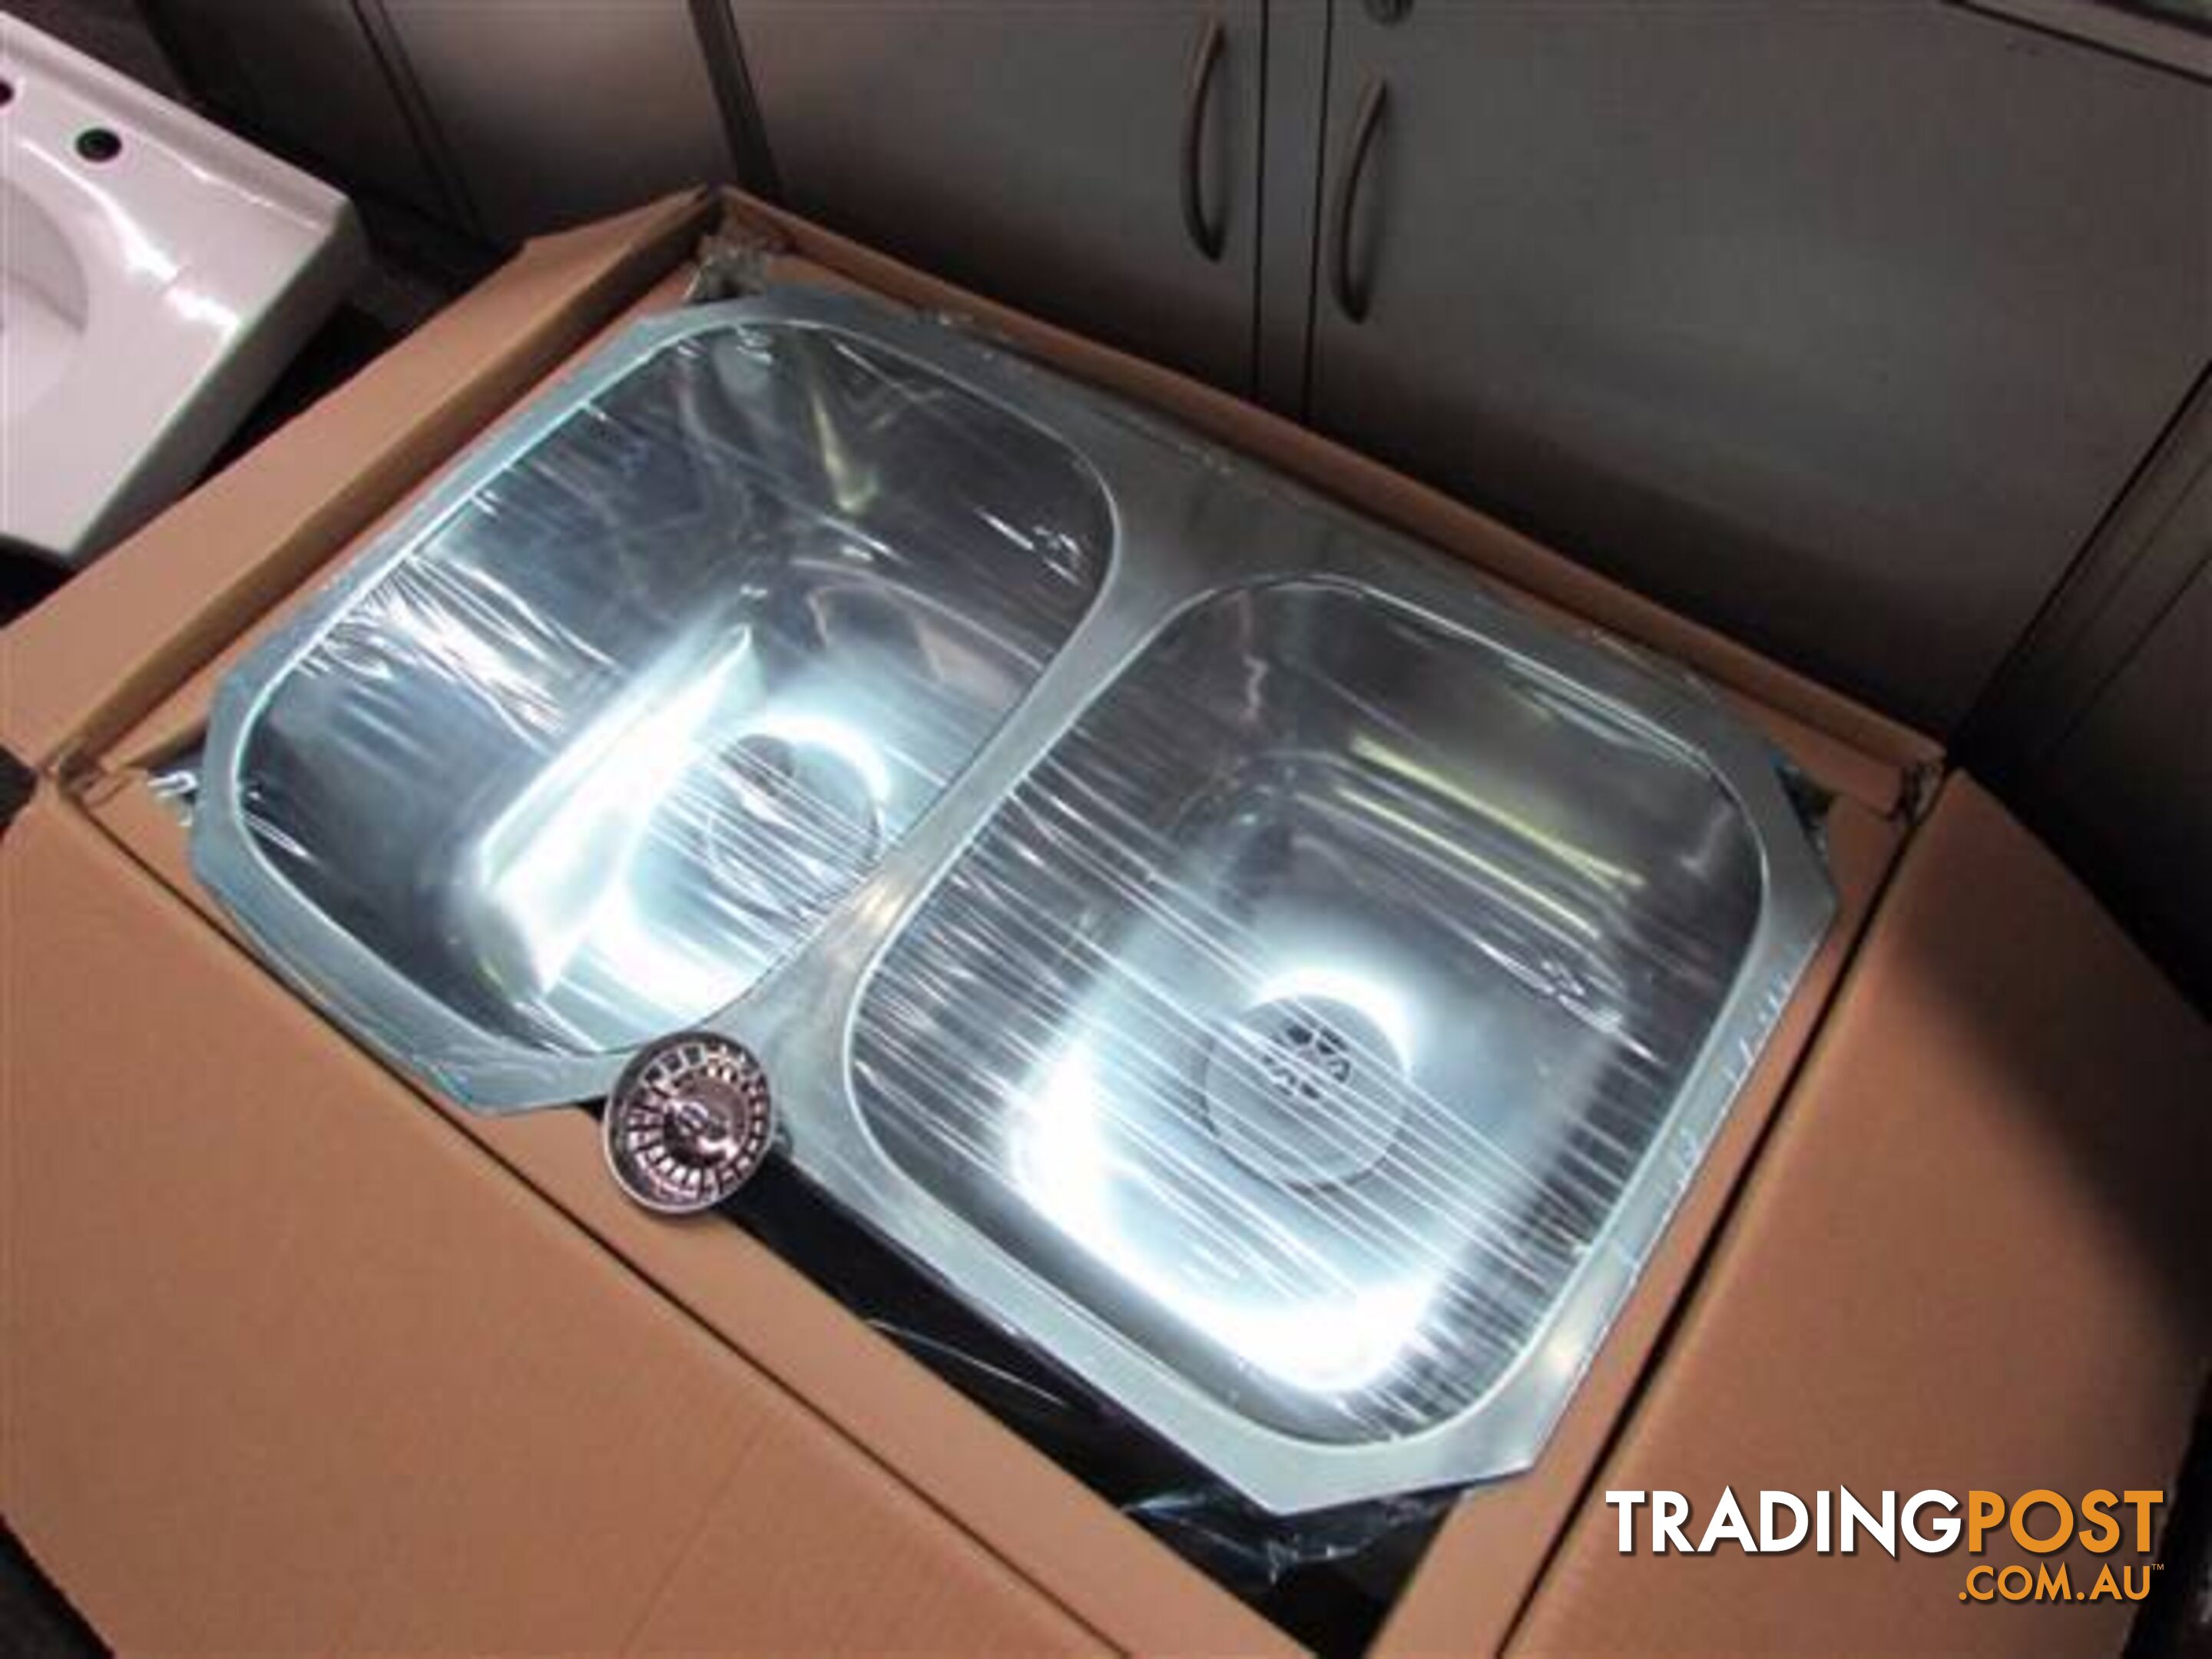 Brand New In Box Undermount Stainless Steel Double Bowl Sink !!!